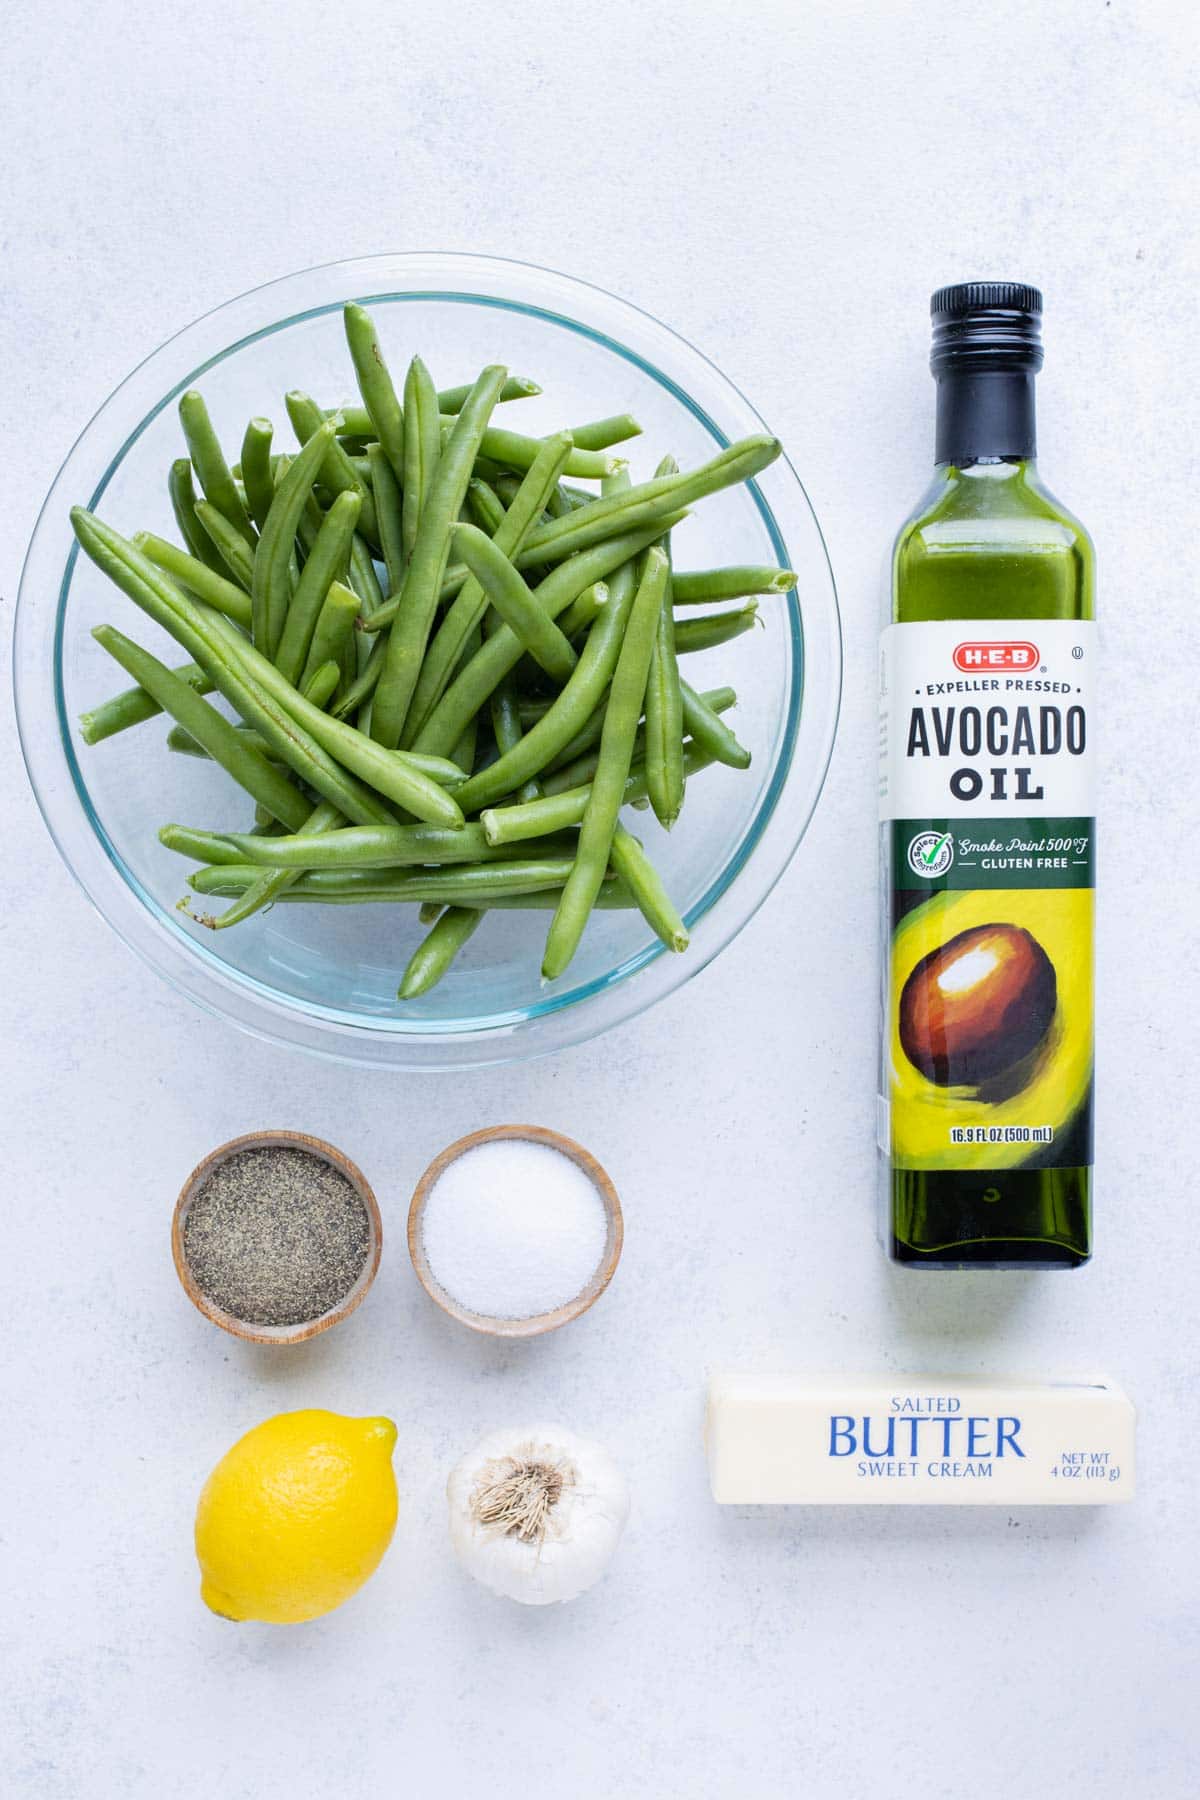 Green beans, oil, butter, garlic, salt, pepper, and lemon juice are the ingredients for this recipe.